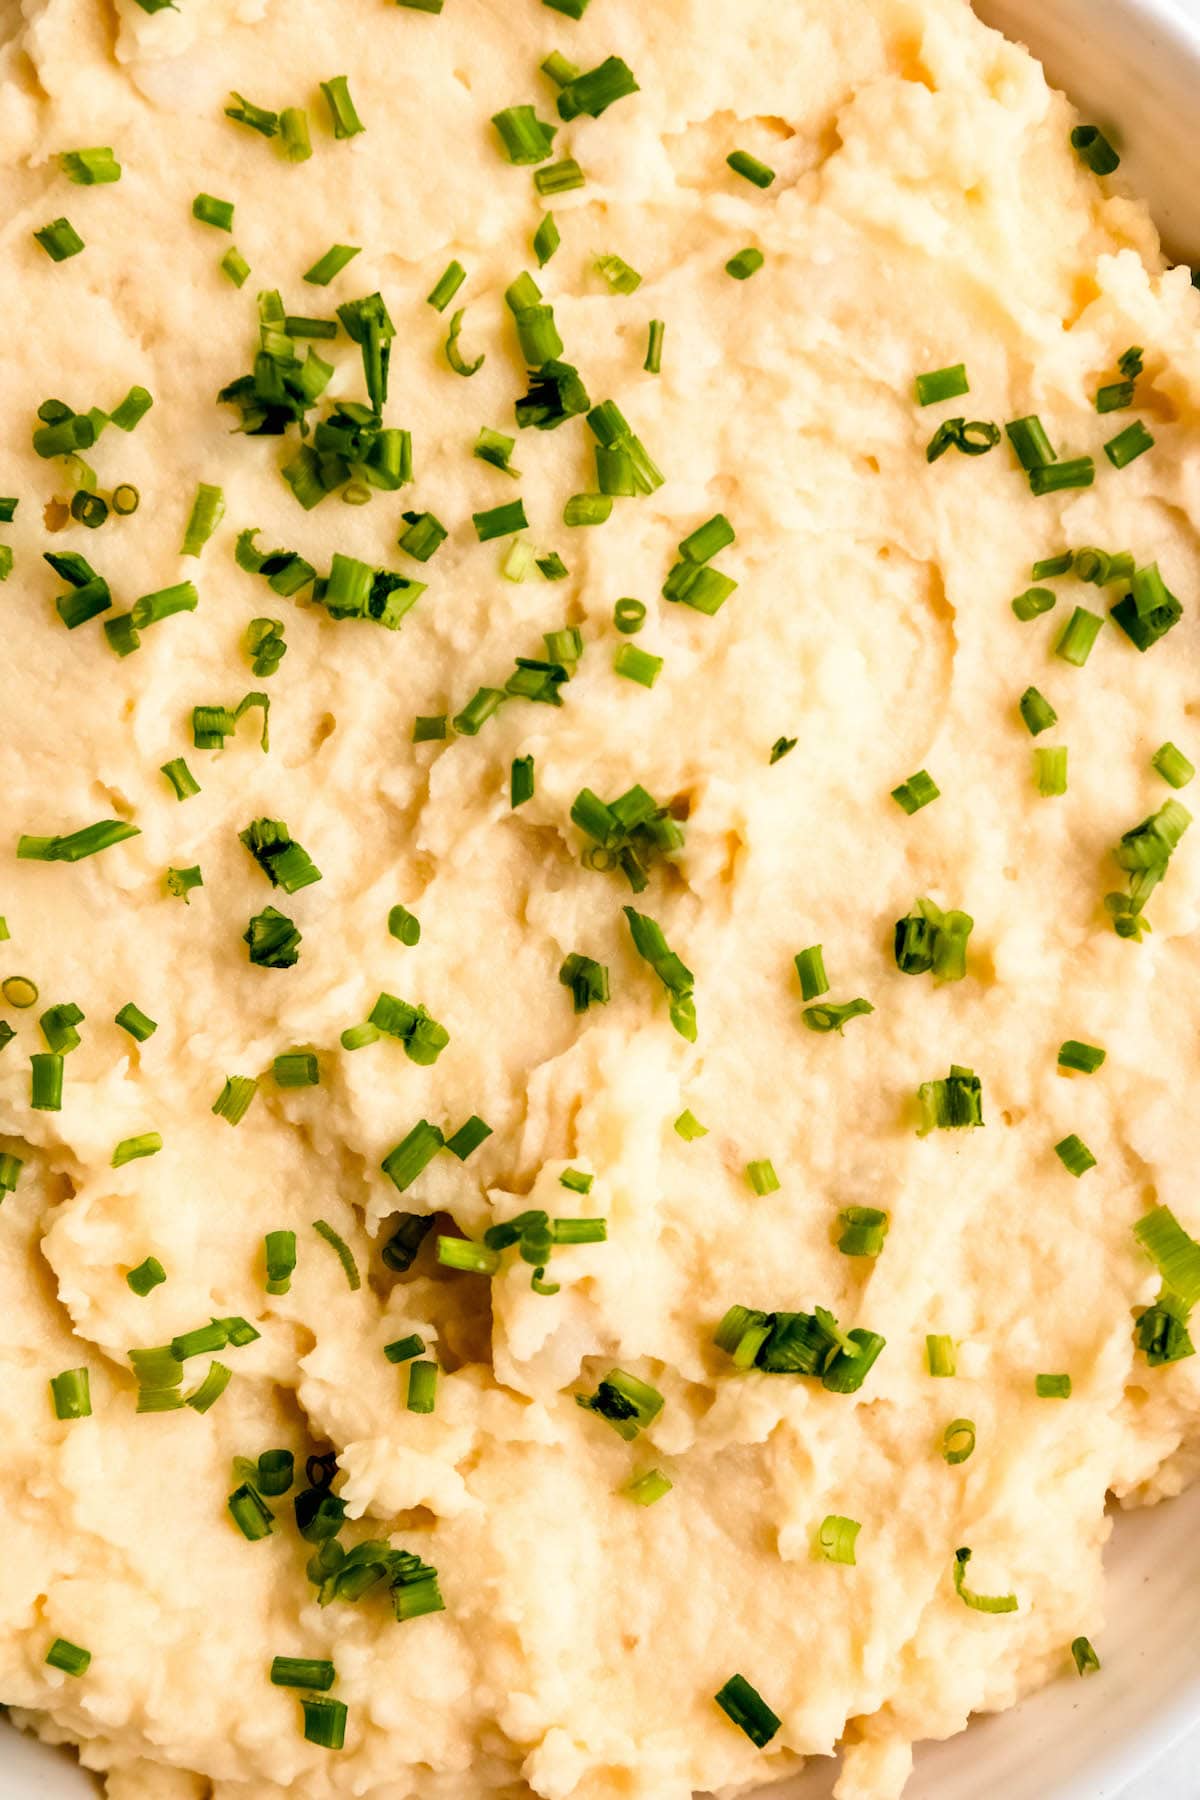 hyper closeup flat lay shot of greek yogurt mashed potatoes topped with chives, showing the creamy consistency.